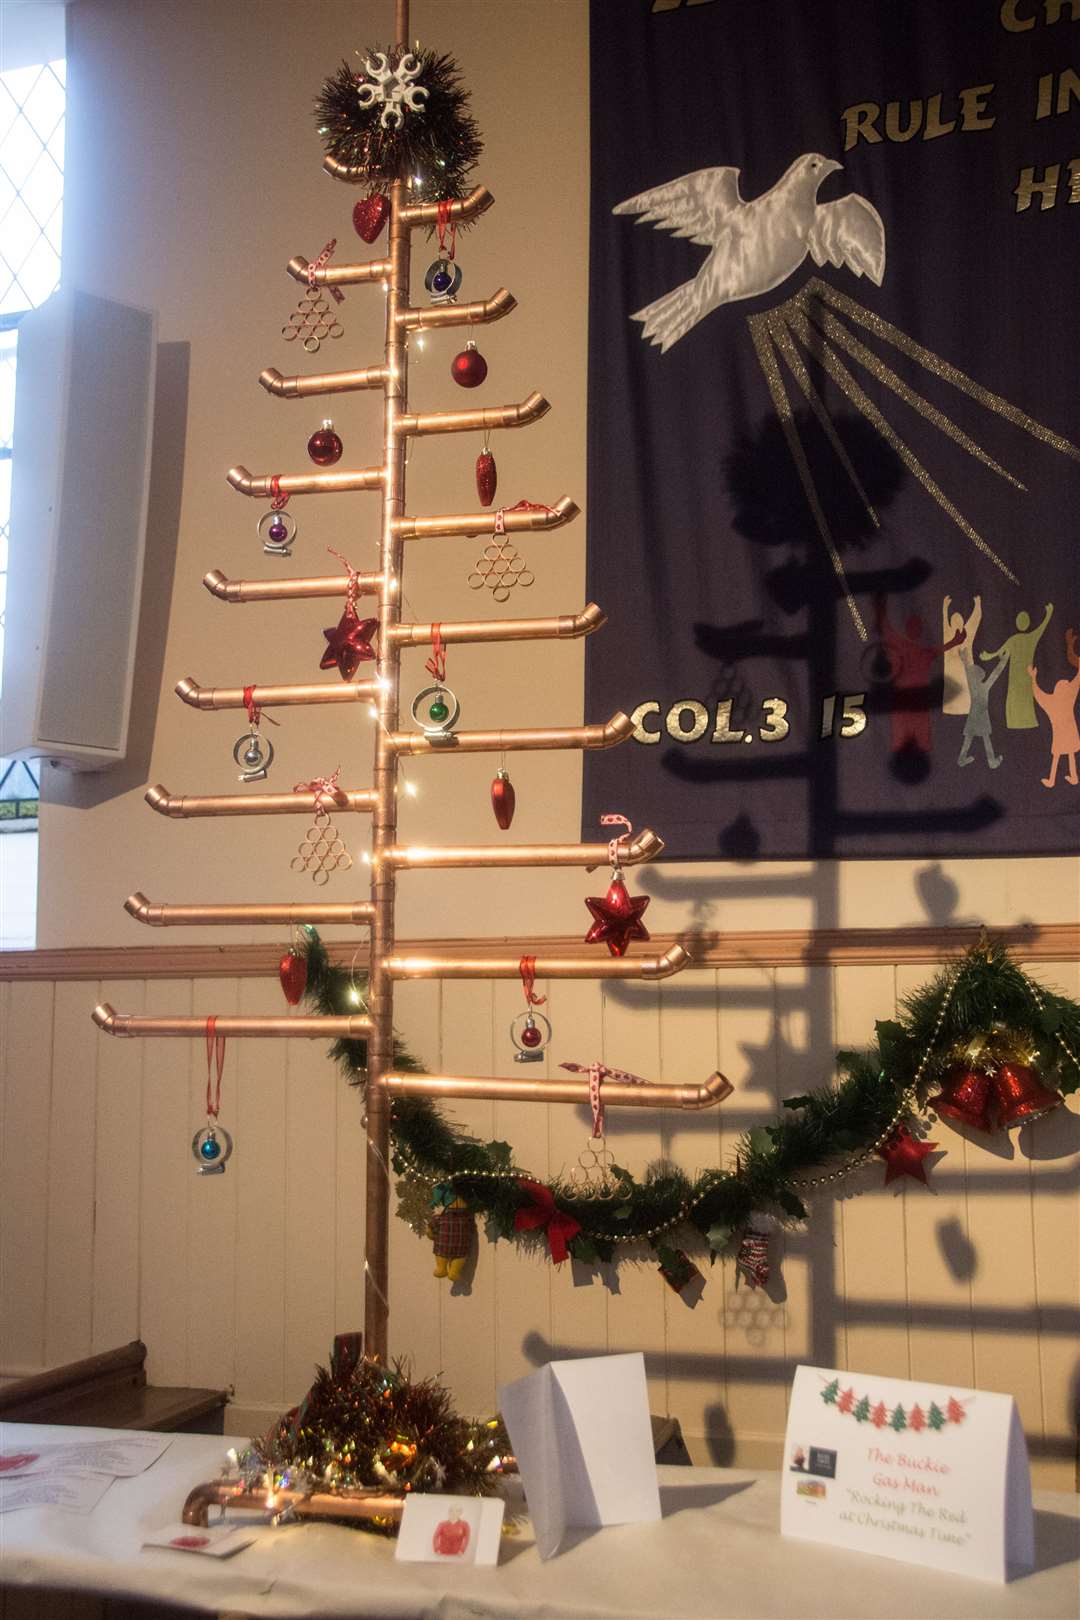 The copper pipe "Gas Man" Christmas tree. Picture: Becky Saunderson.